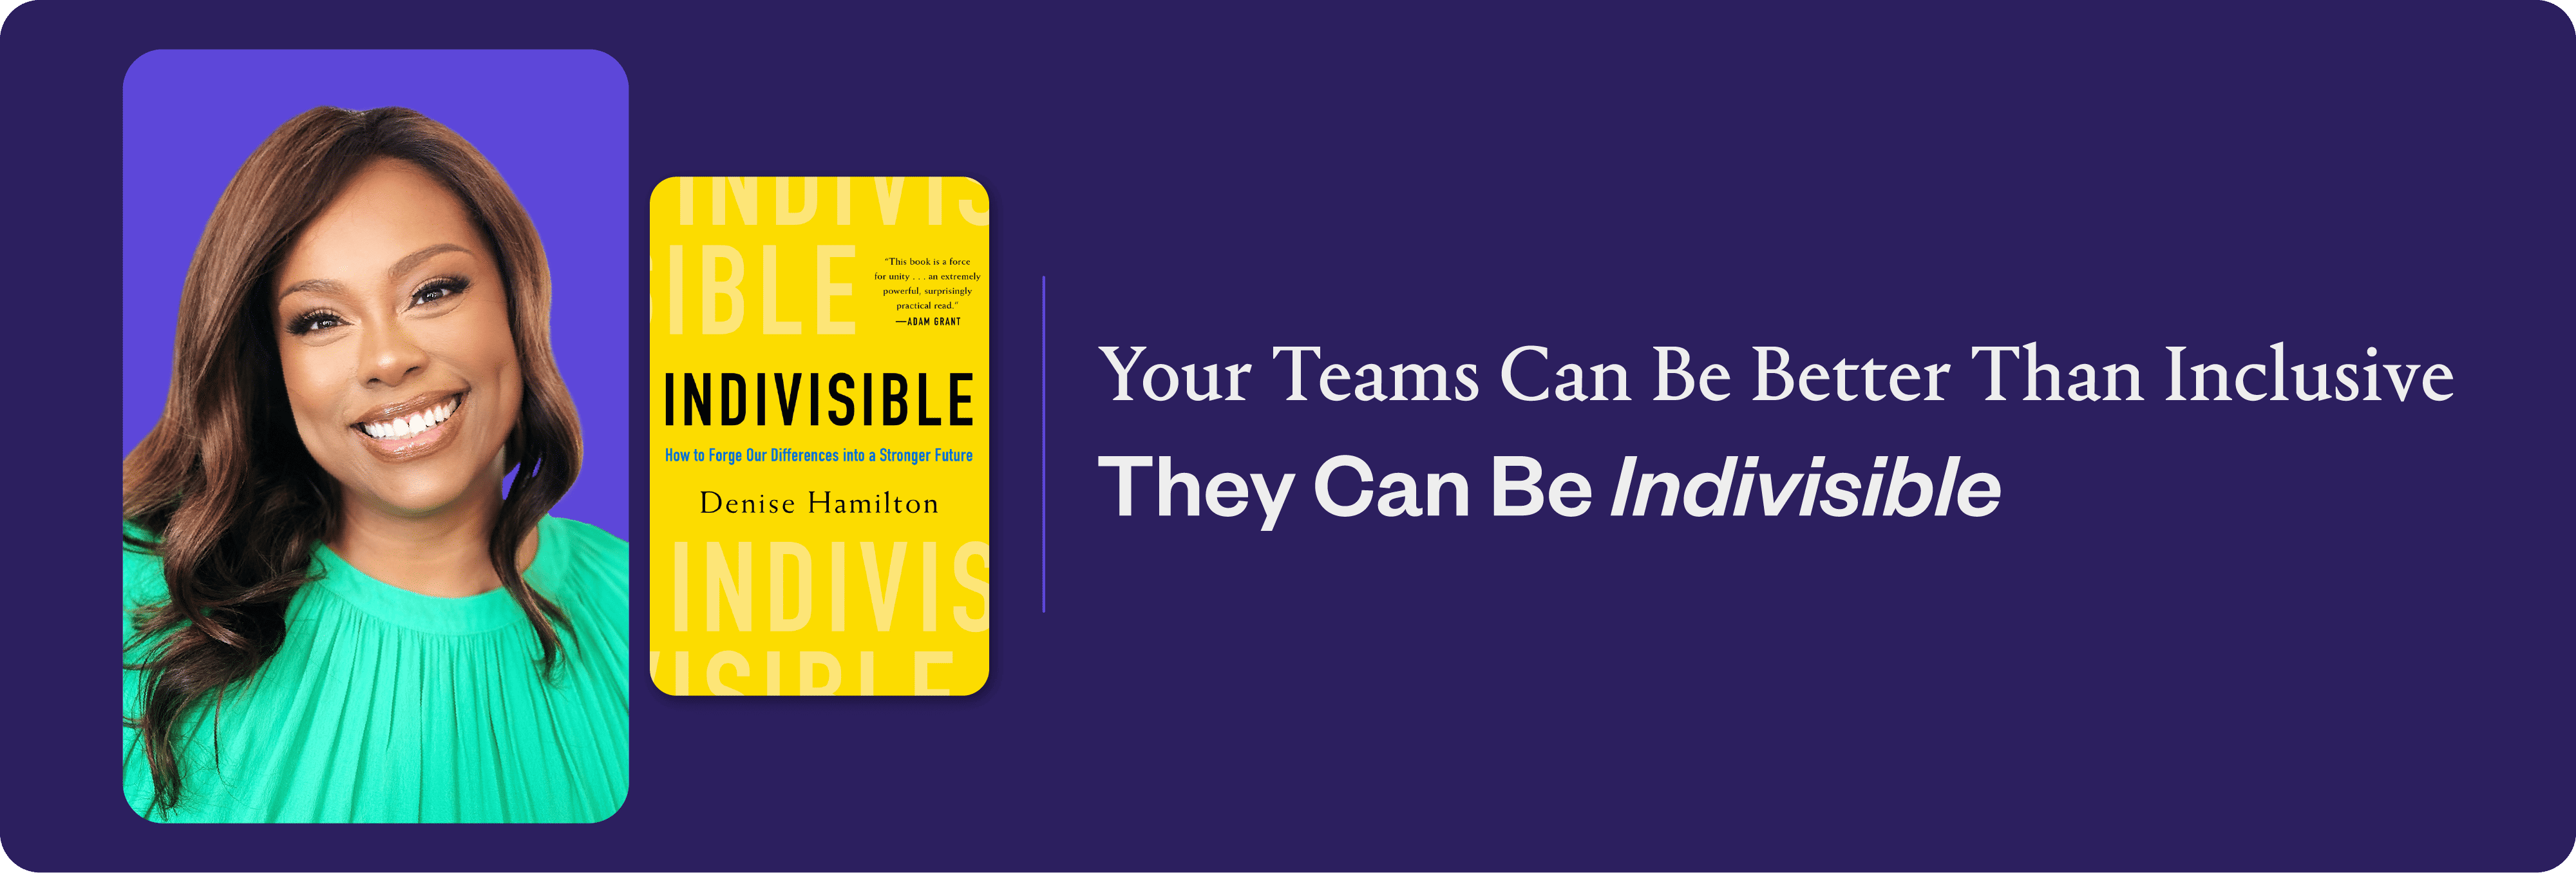 How Organizations Can Move Beyond Inclusion—and Towards Indivisibility. DEI Speaker Denise Hamilton’s New Book